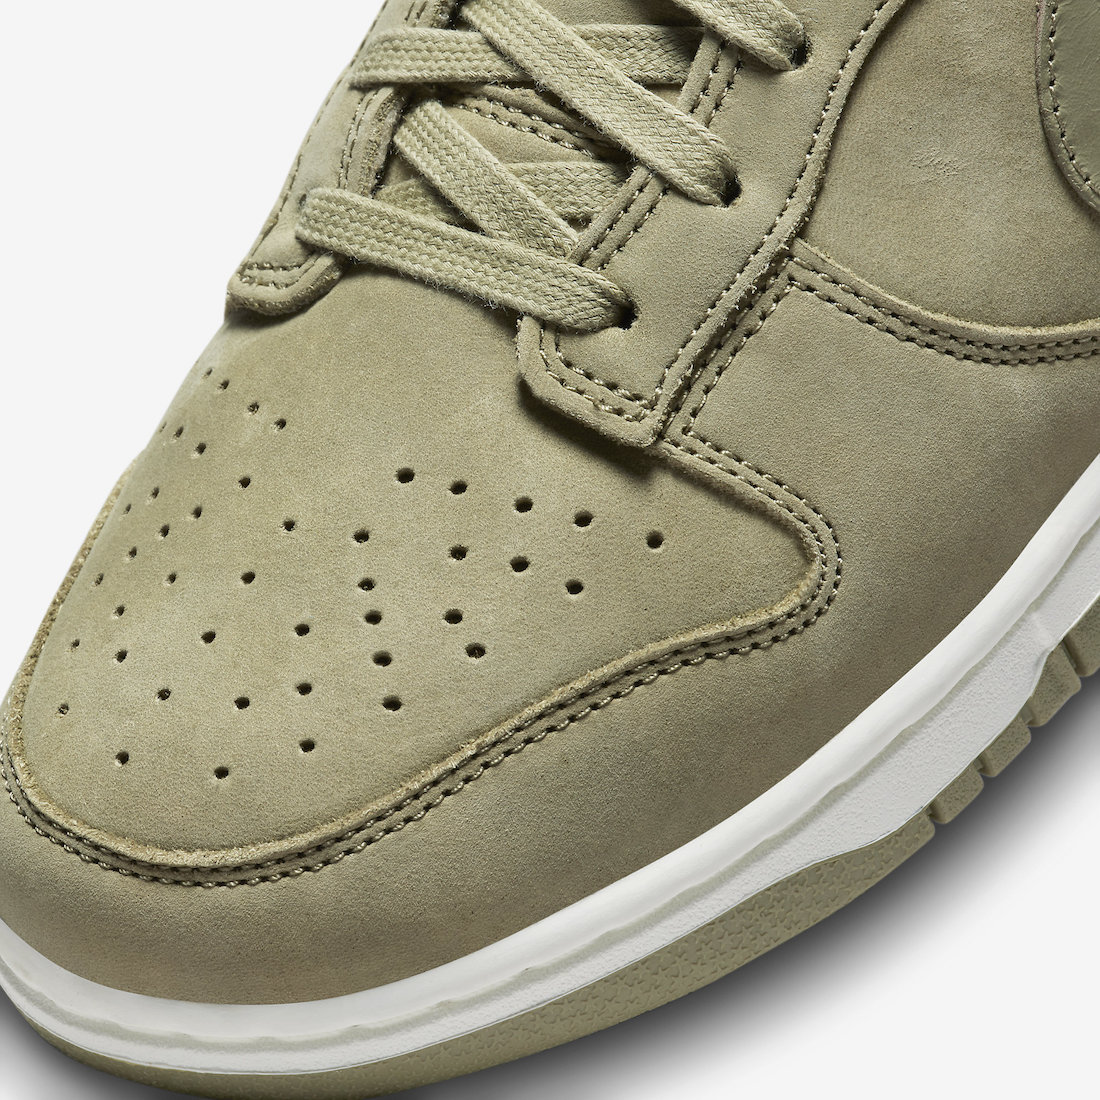 Nike Dunk Low Neutral Olive DV7415 200 Release Date 6